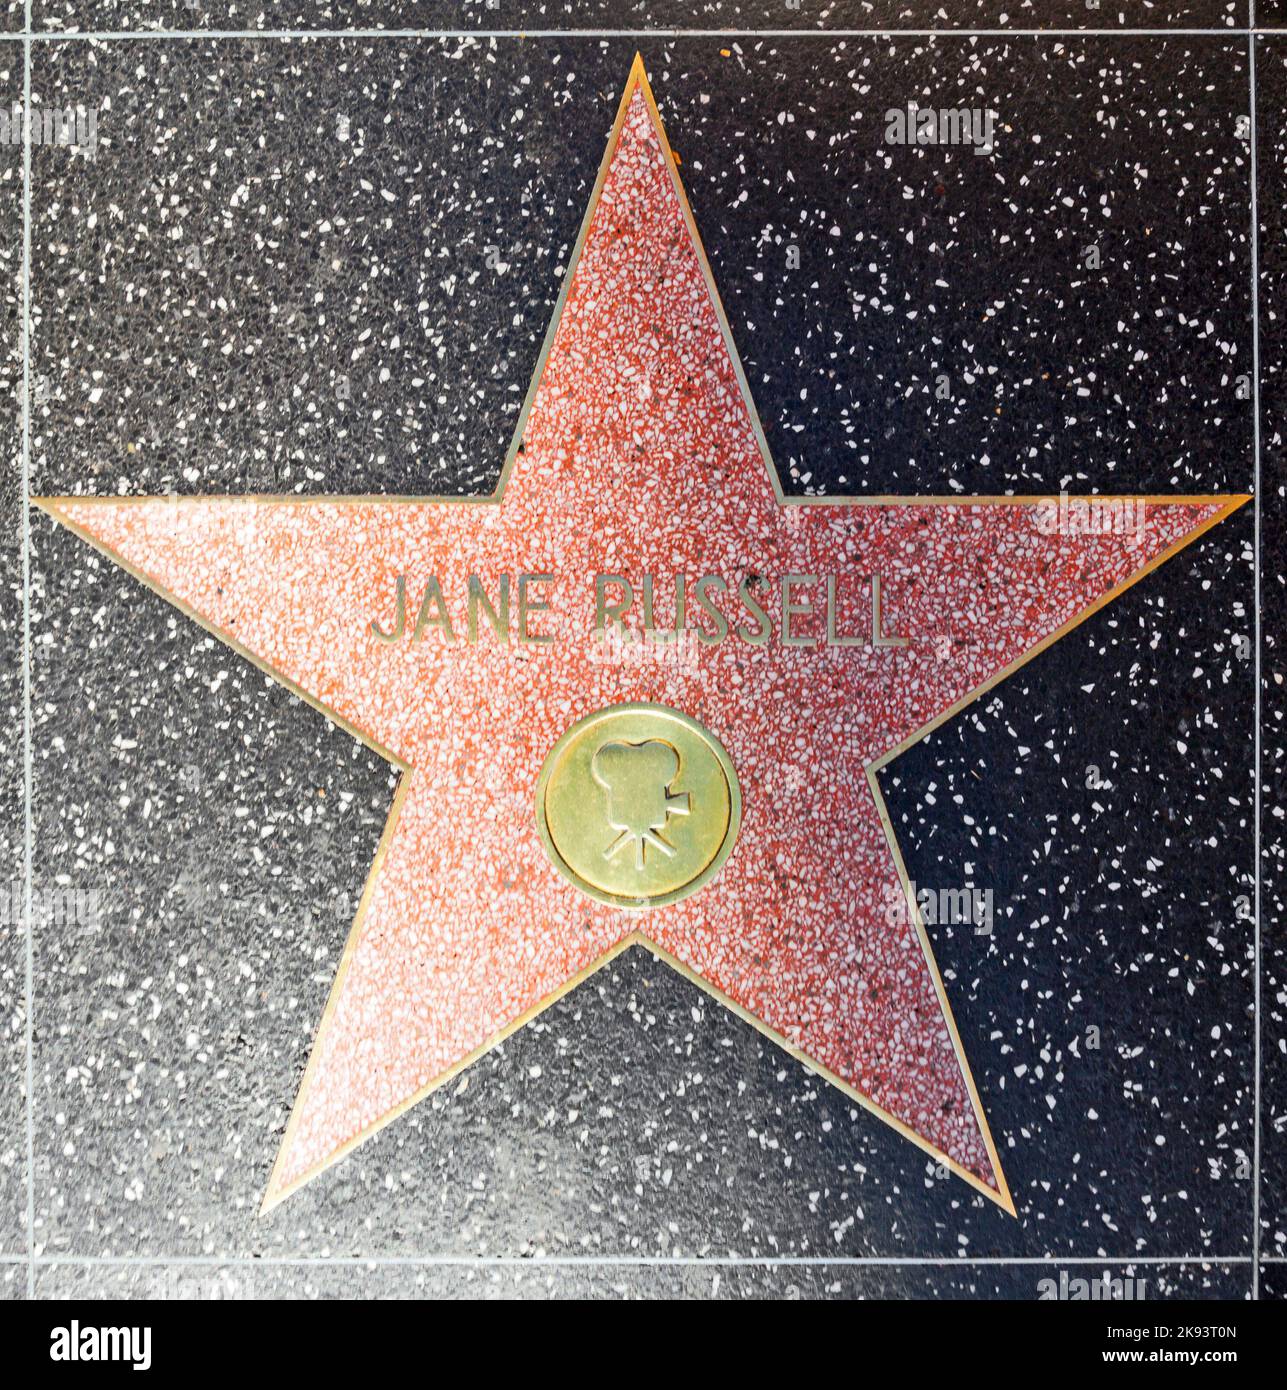 HOLLYWOOD - JUNE 24: Jane Russells star on Hollywood Walk of Fame on June 24, 2012 in Hollywood, California. This star is located on Hollywood Blvd. a Stock Photo